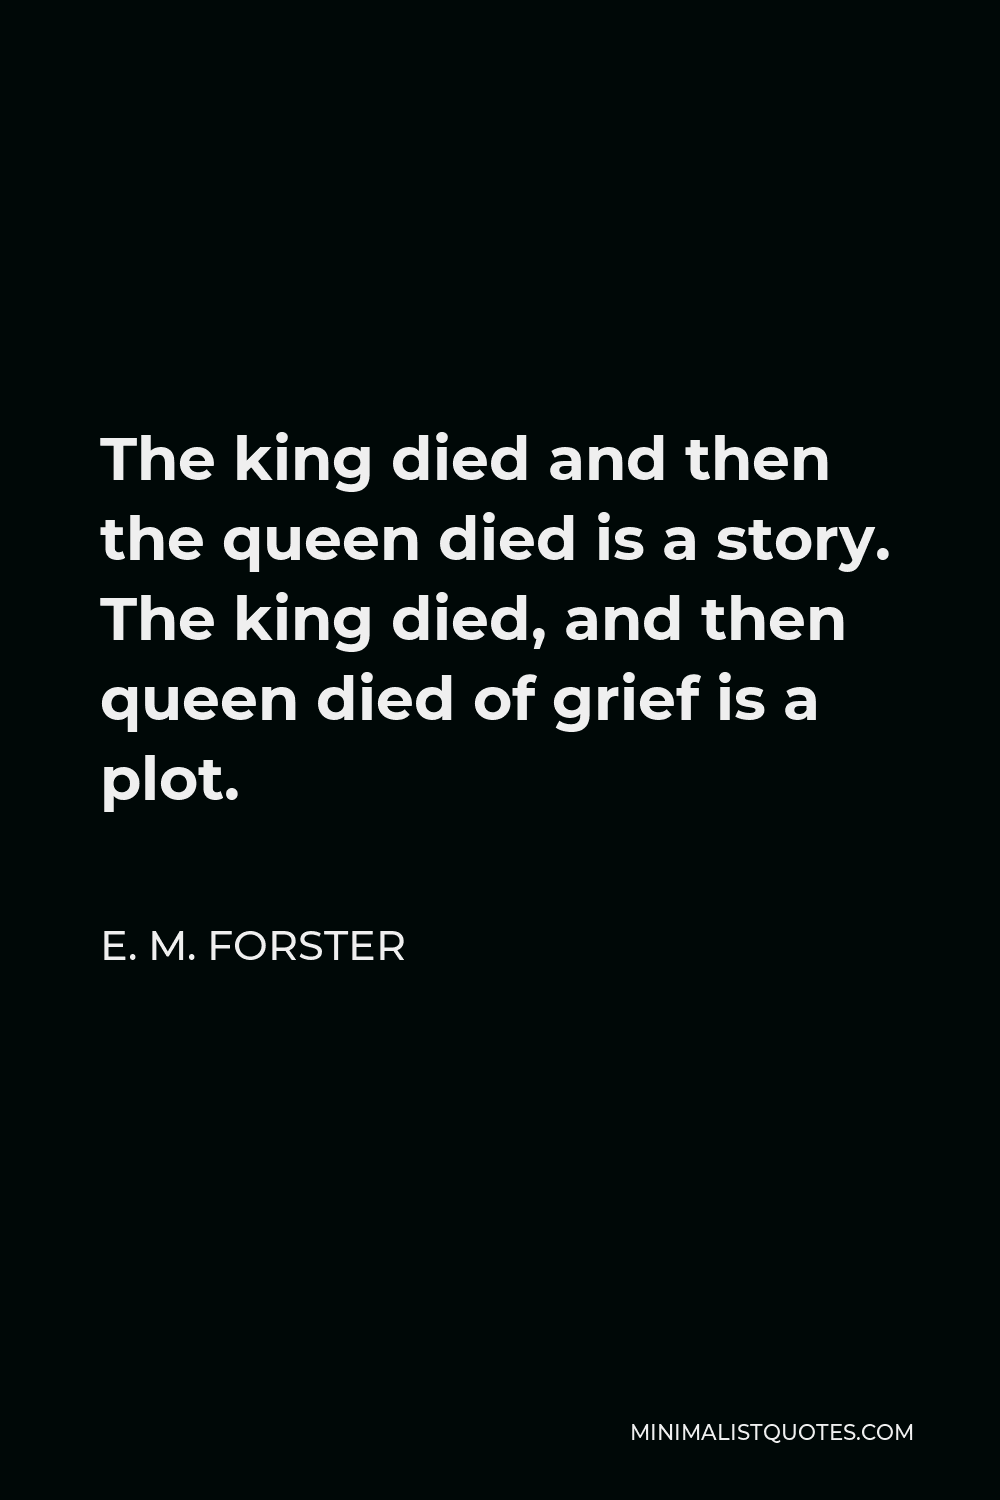 E. M. Forster Quote - The king died and then the queen died is a story. The king died, and then queen died of grief is a plot.